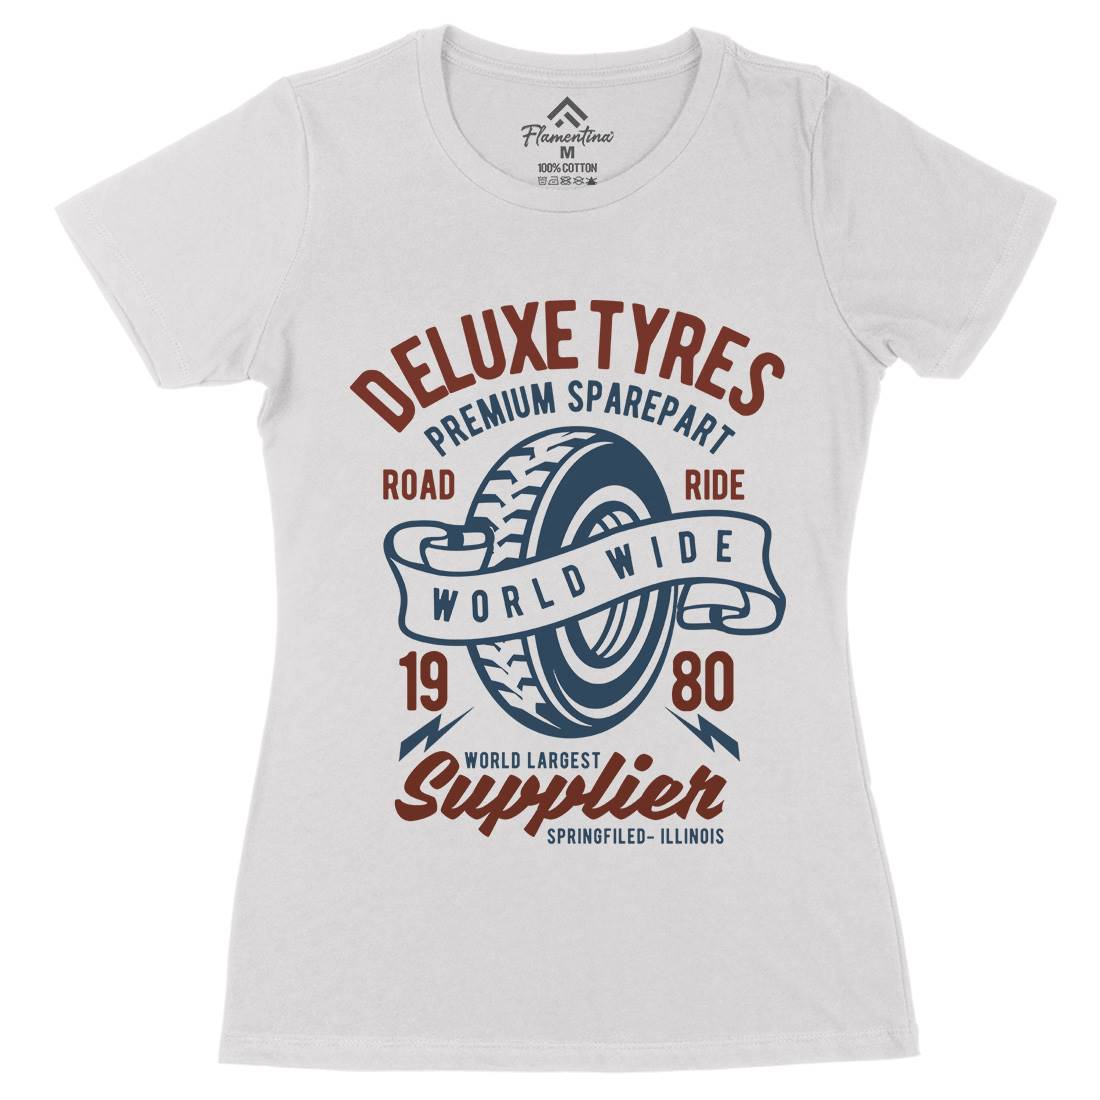 Deluxe Tyres Womens Organic Crew Neck T-Shirt Cars B204